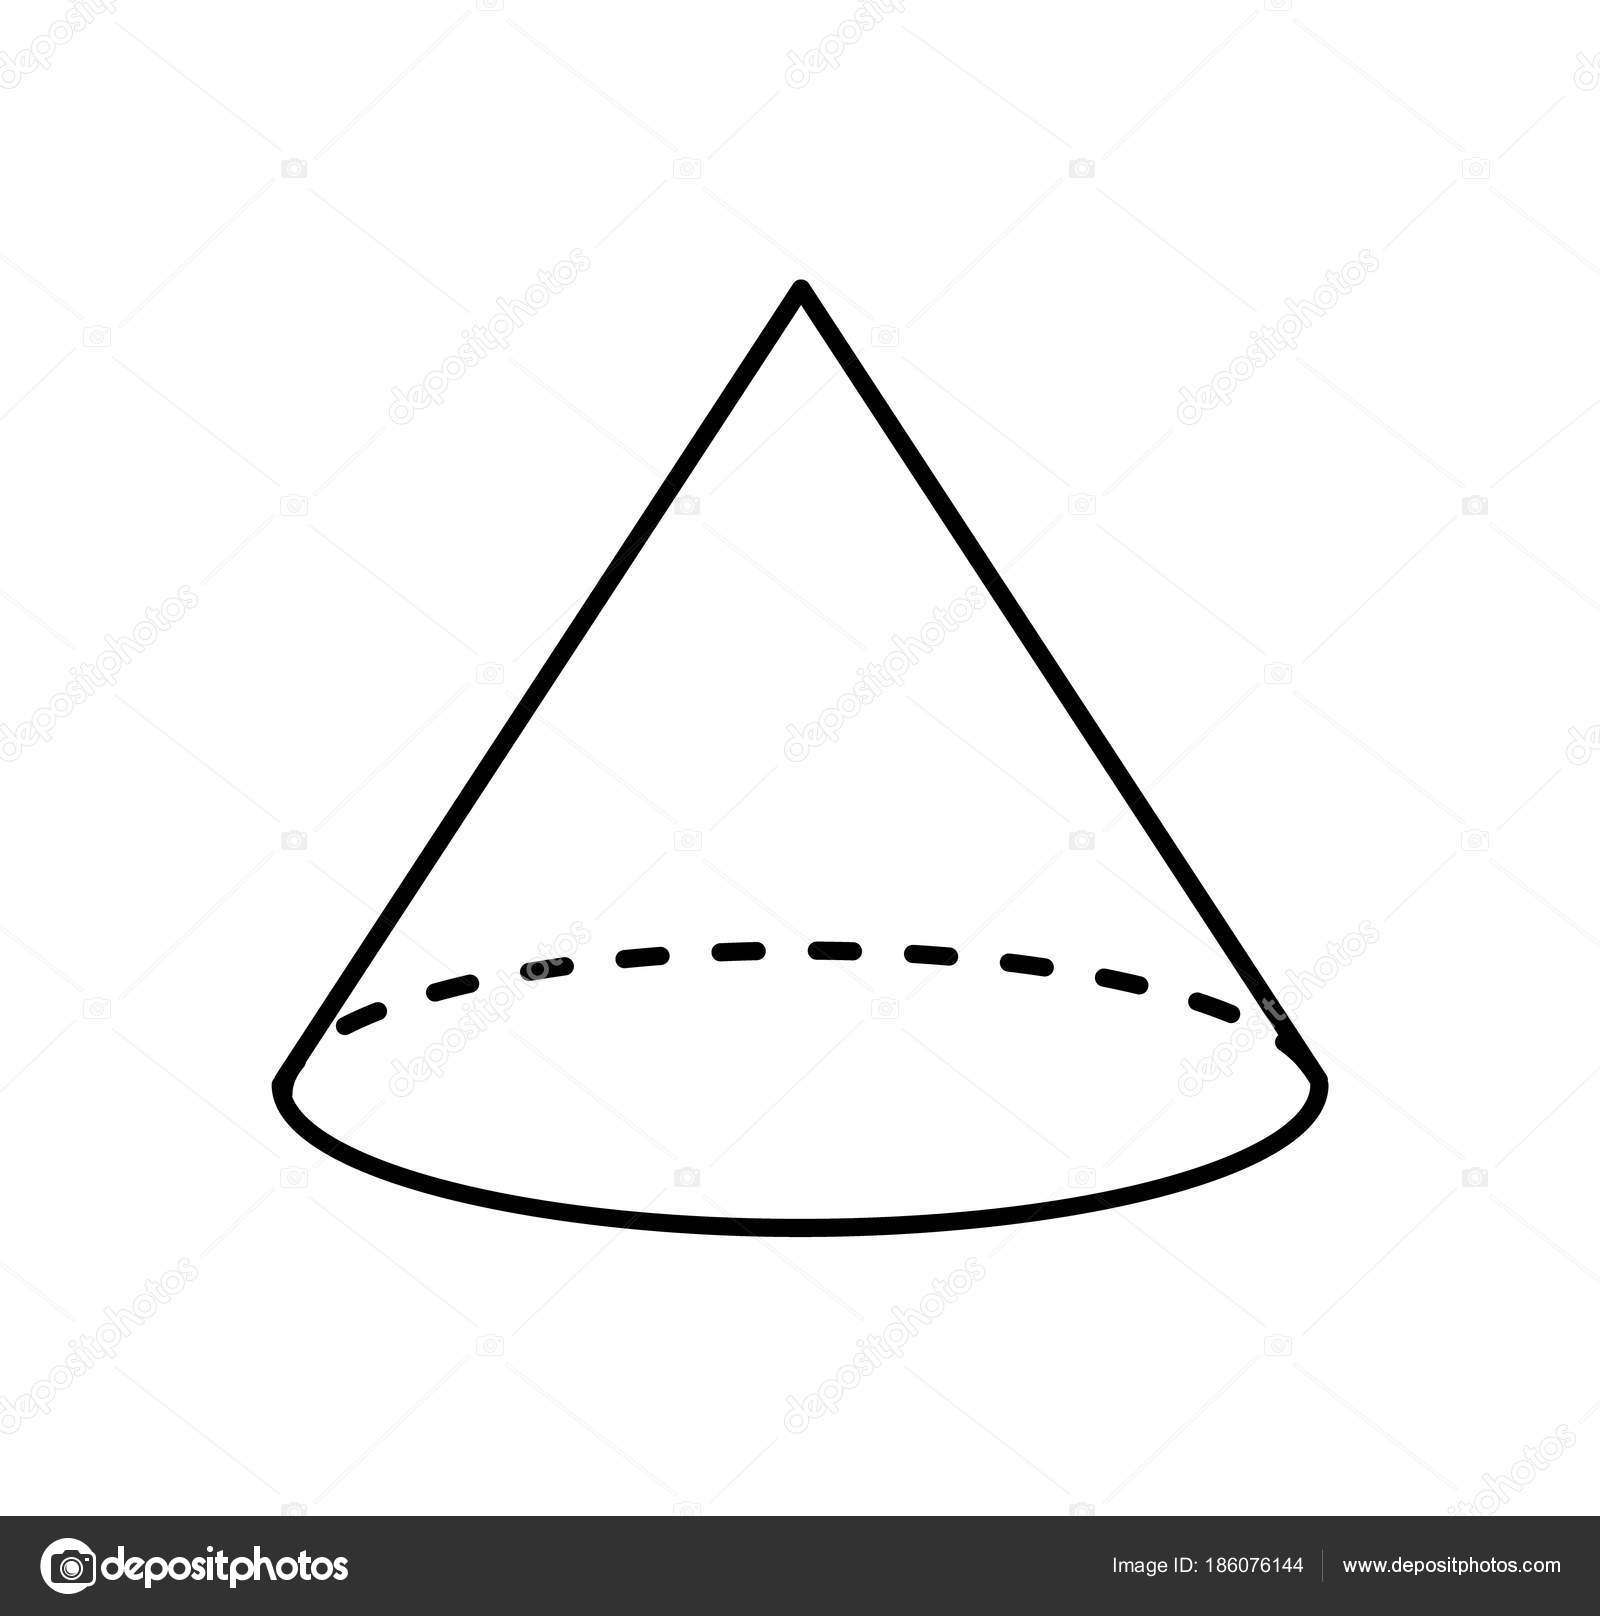 Cone of White Color Linear Sketch, Geometric Shape Stock Vector by